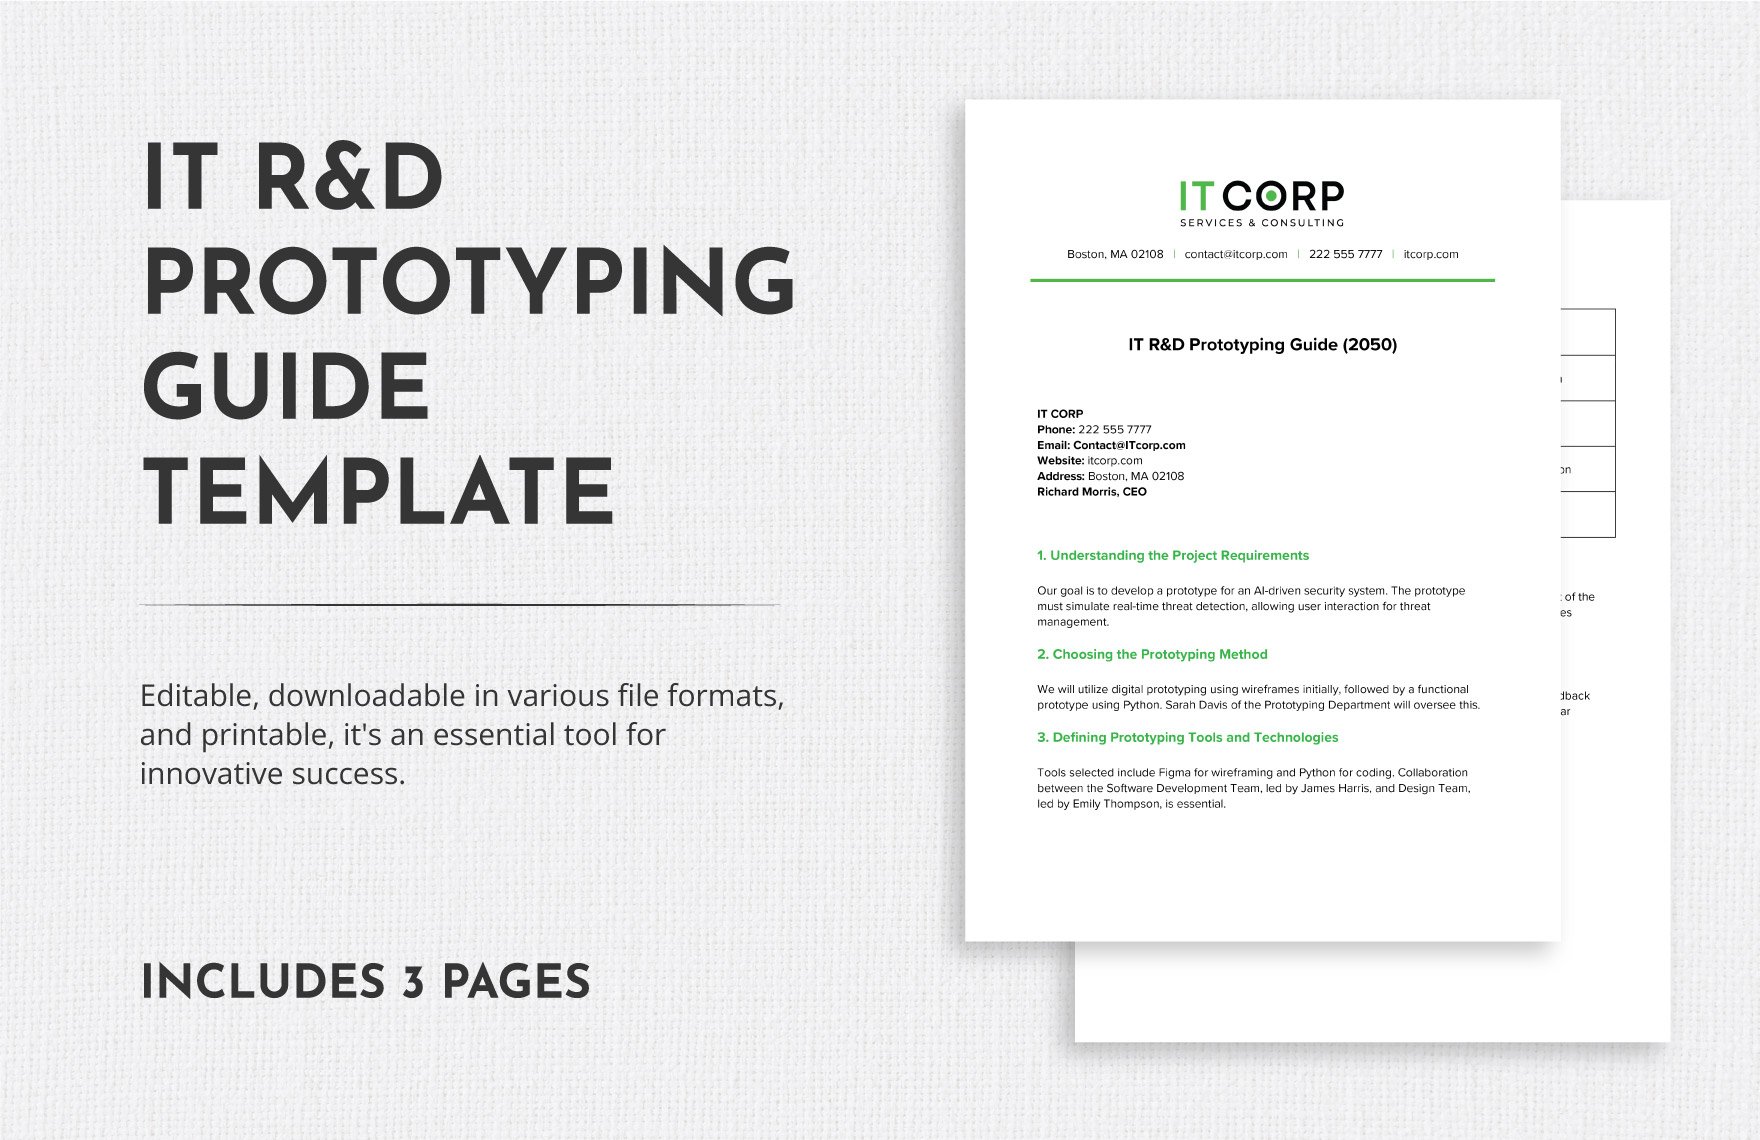 IT R&D Prototyping Guide Template